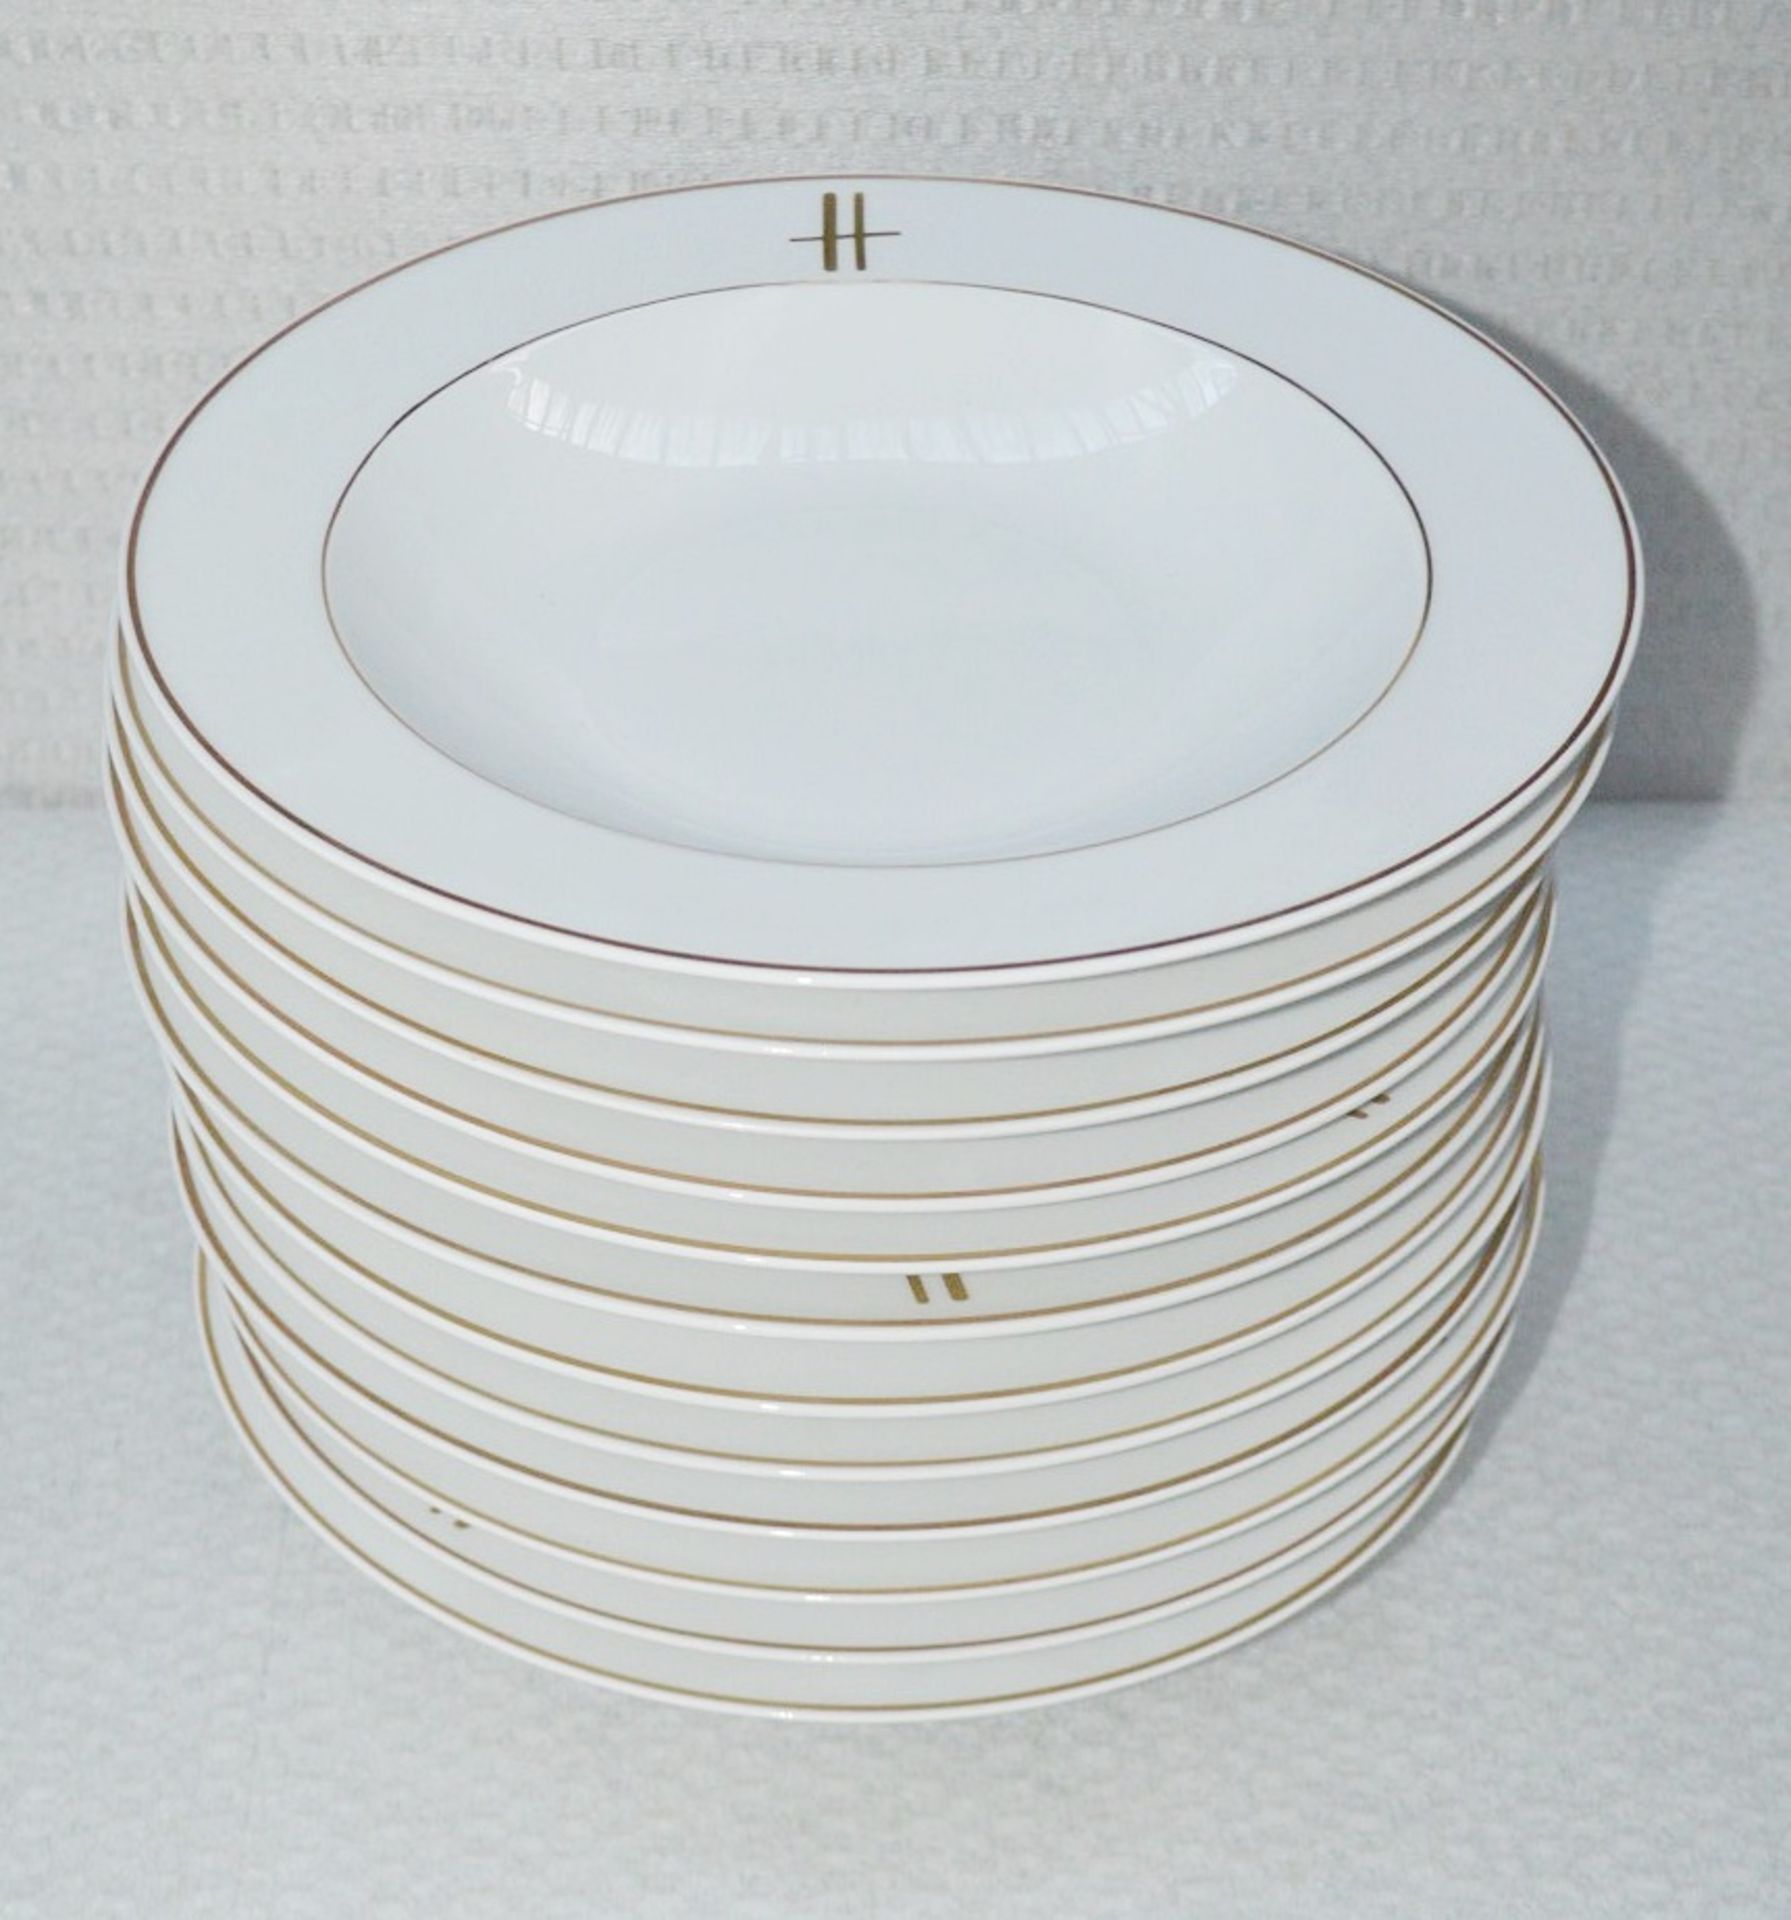 12 x PILLIVUYT Porcelain Pasta / Soup Plates In White Featuring 'Famous Branding' In Gold